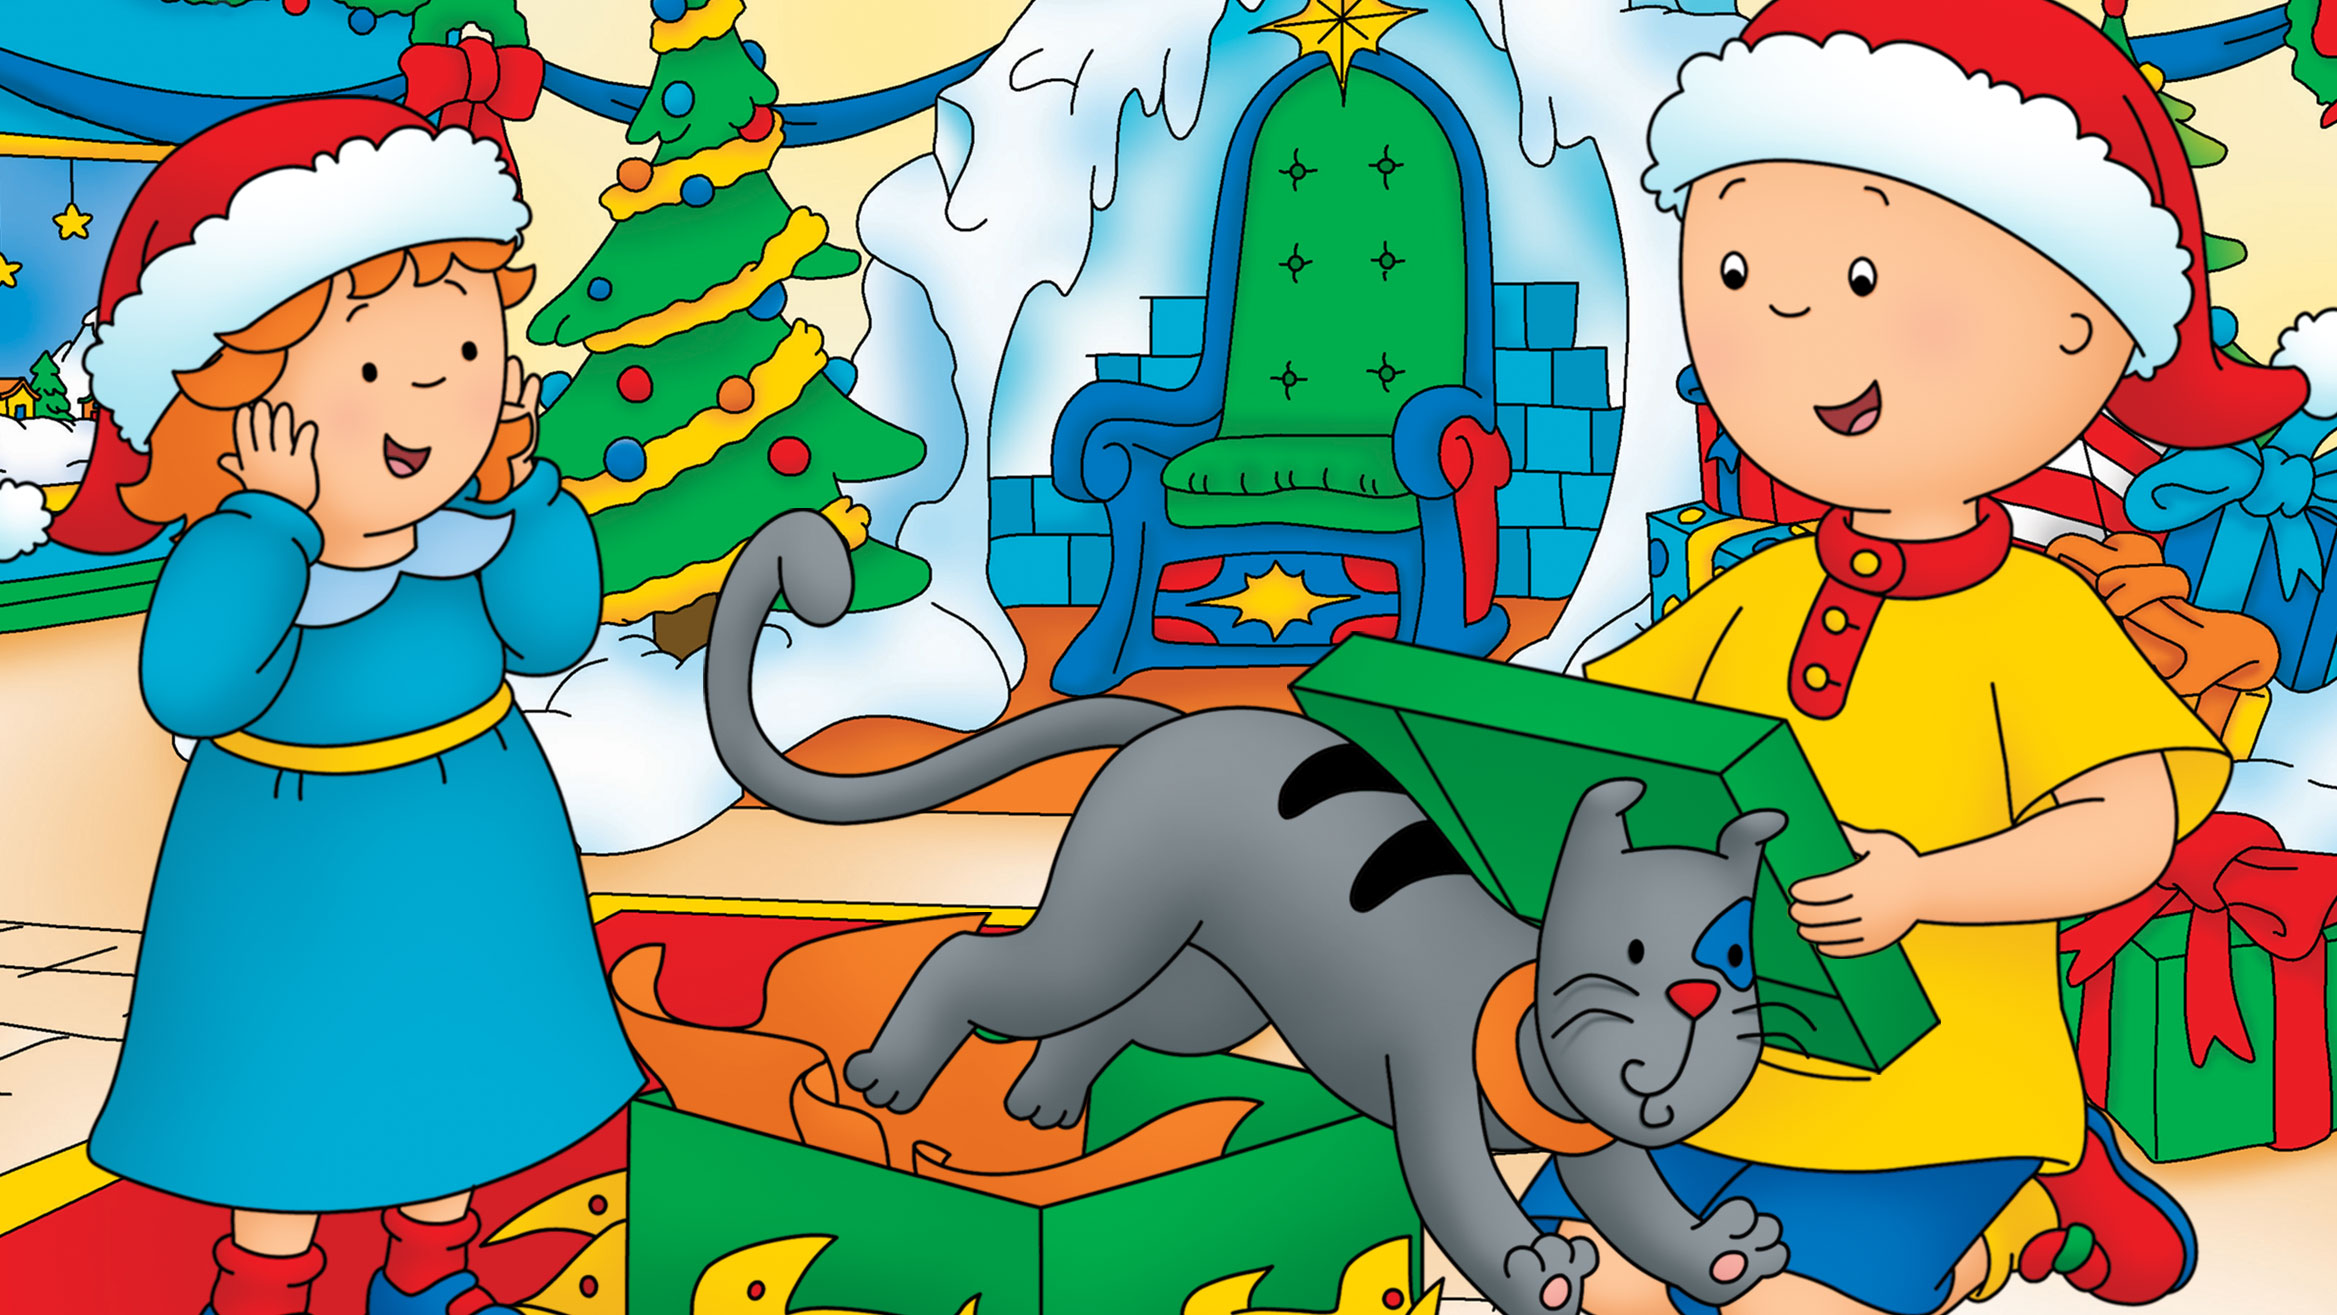 A boy and a girl, wearing red Santa Claus hats, are opening up a gift. A grey cat is jumping out of the gift box.